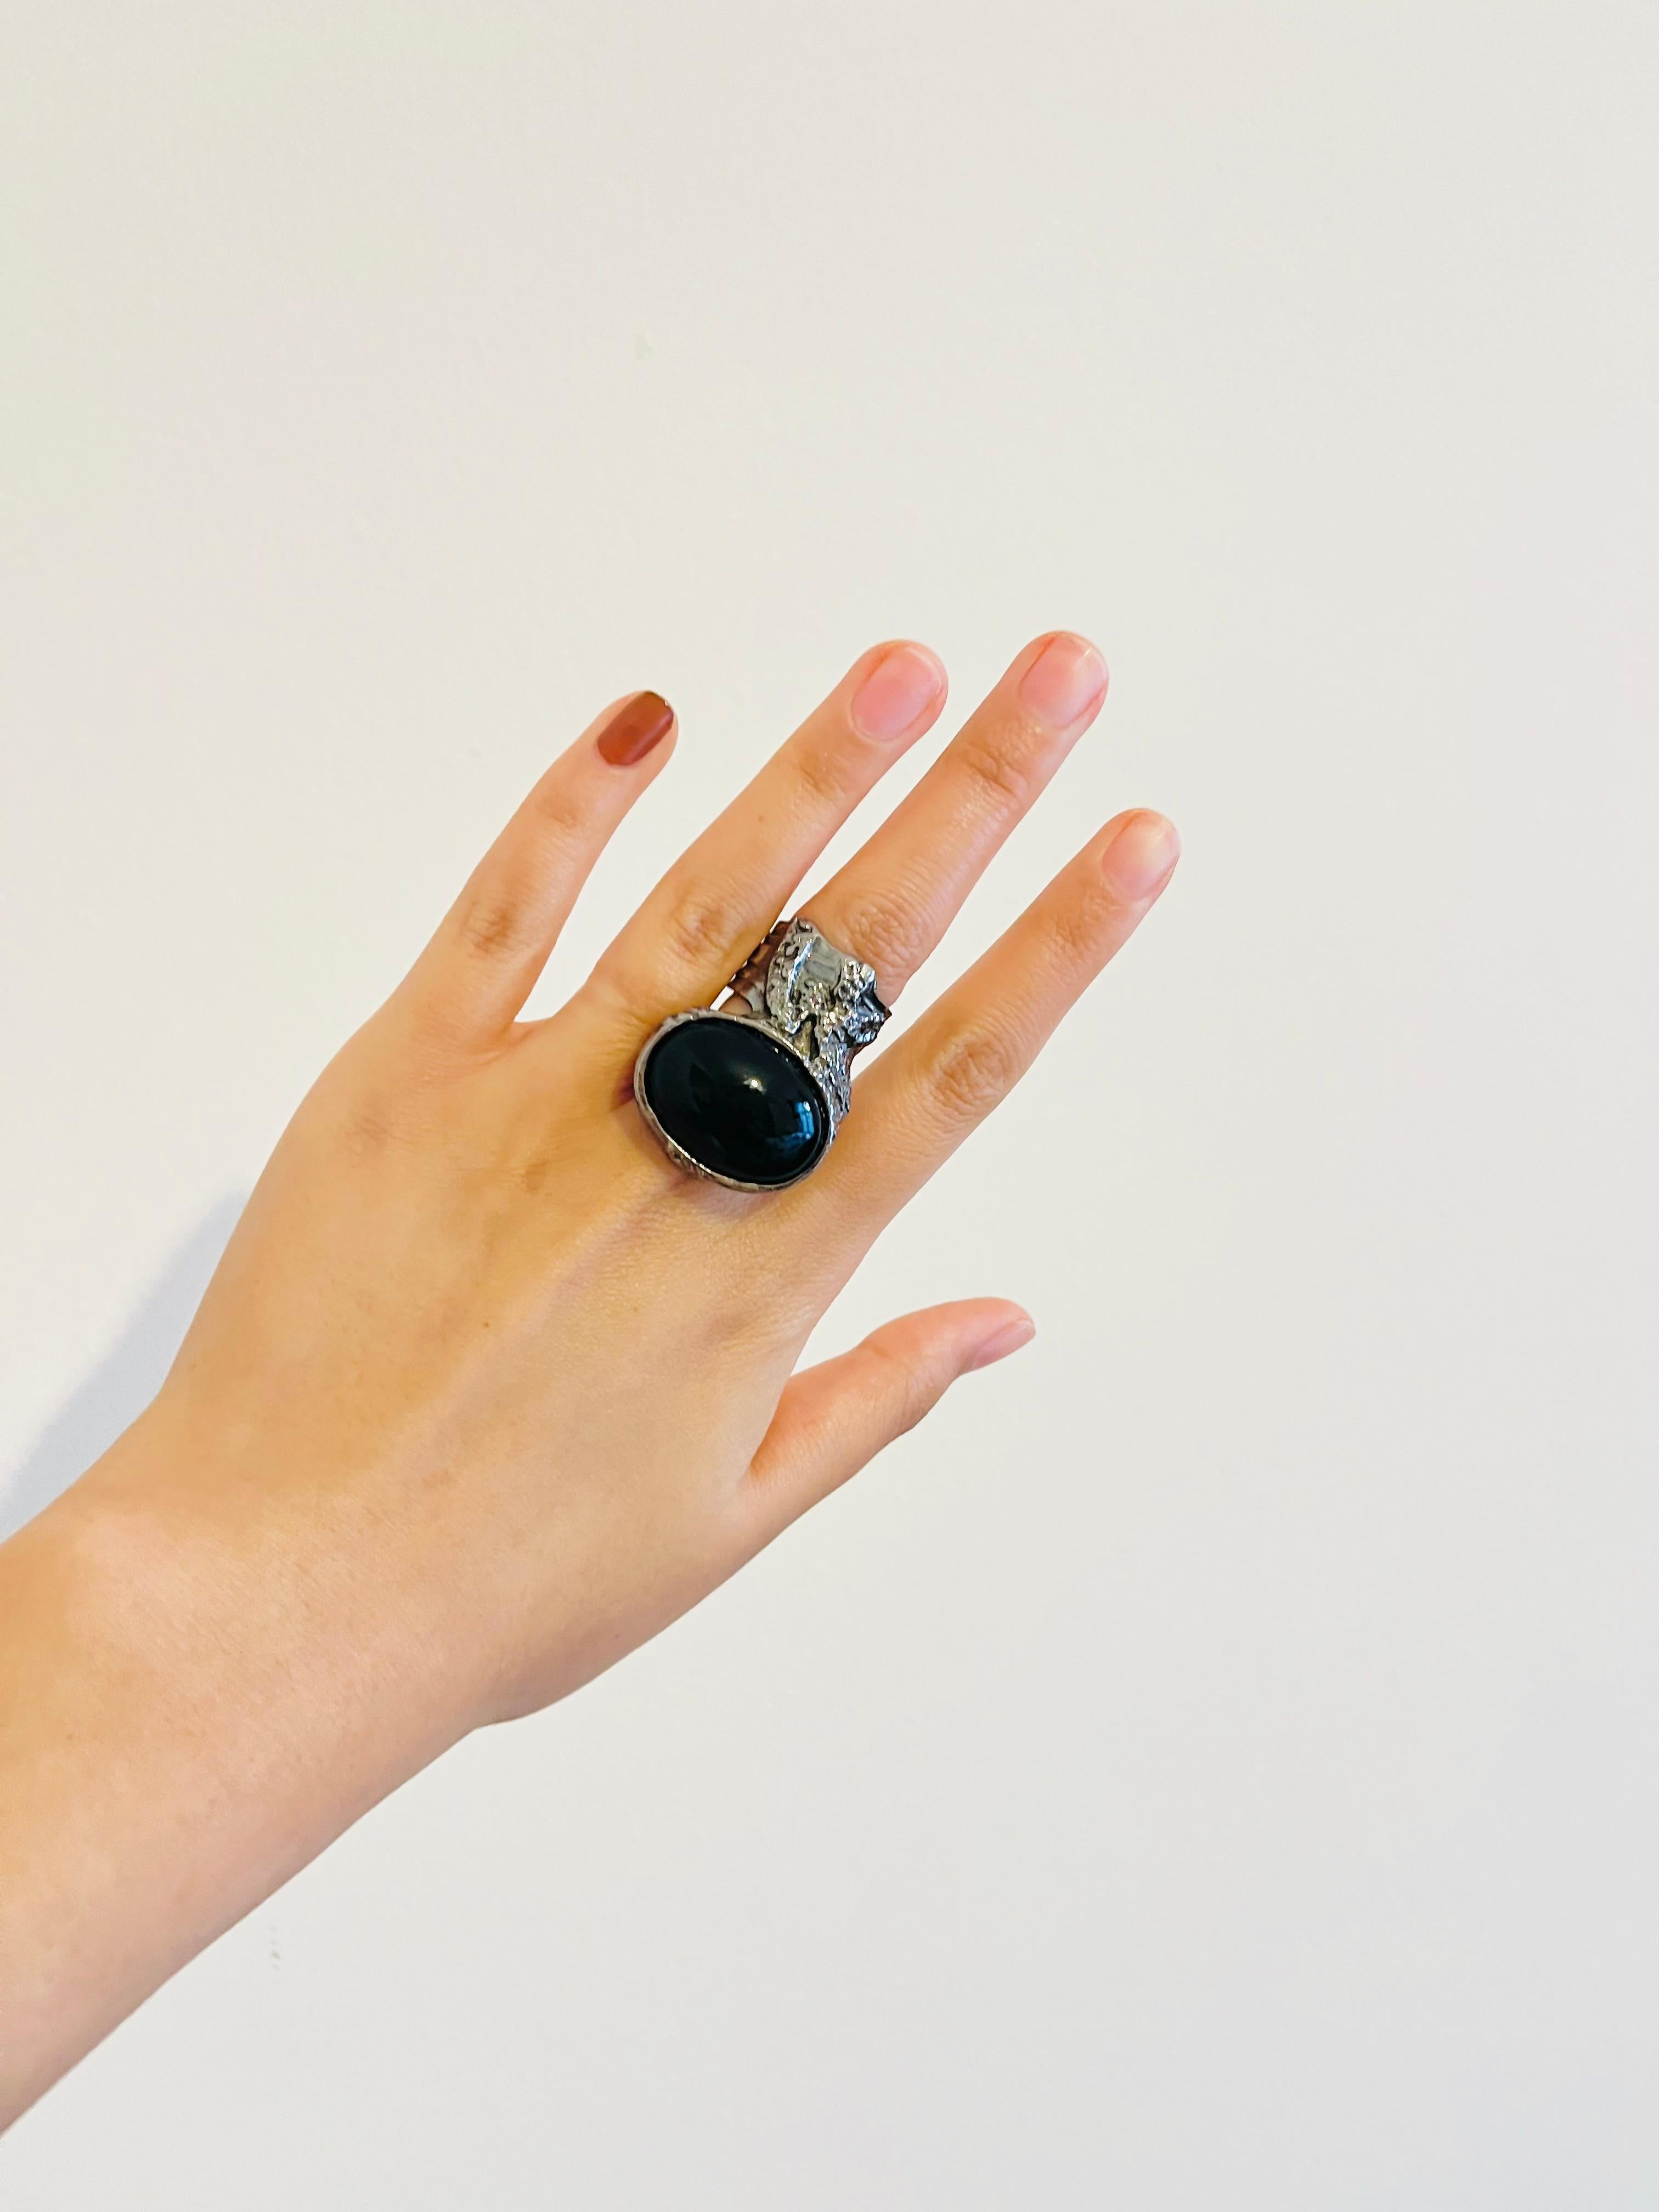 Yves Saint Laurent YSL Arty Black Cabochon Chunky Statement Silver Ring, Size 6 In Excellent Condition For Sale In Wokingham, England